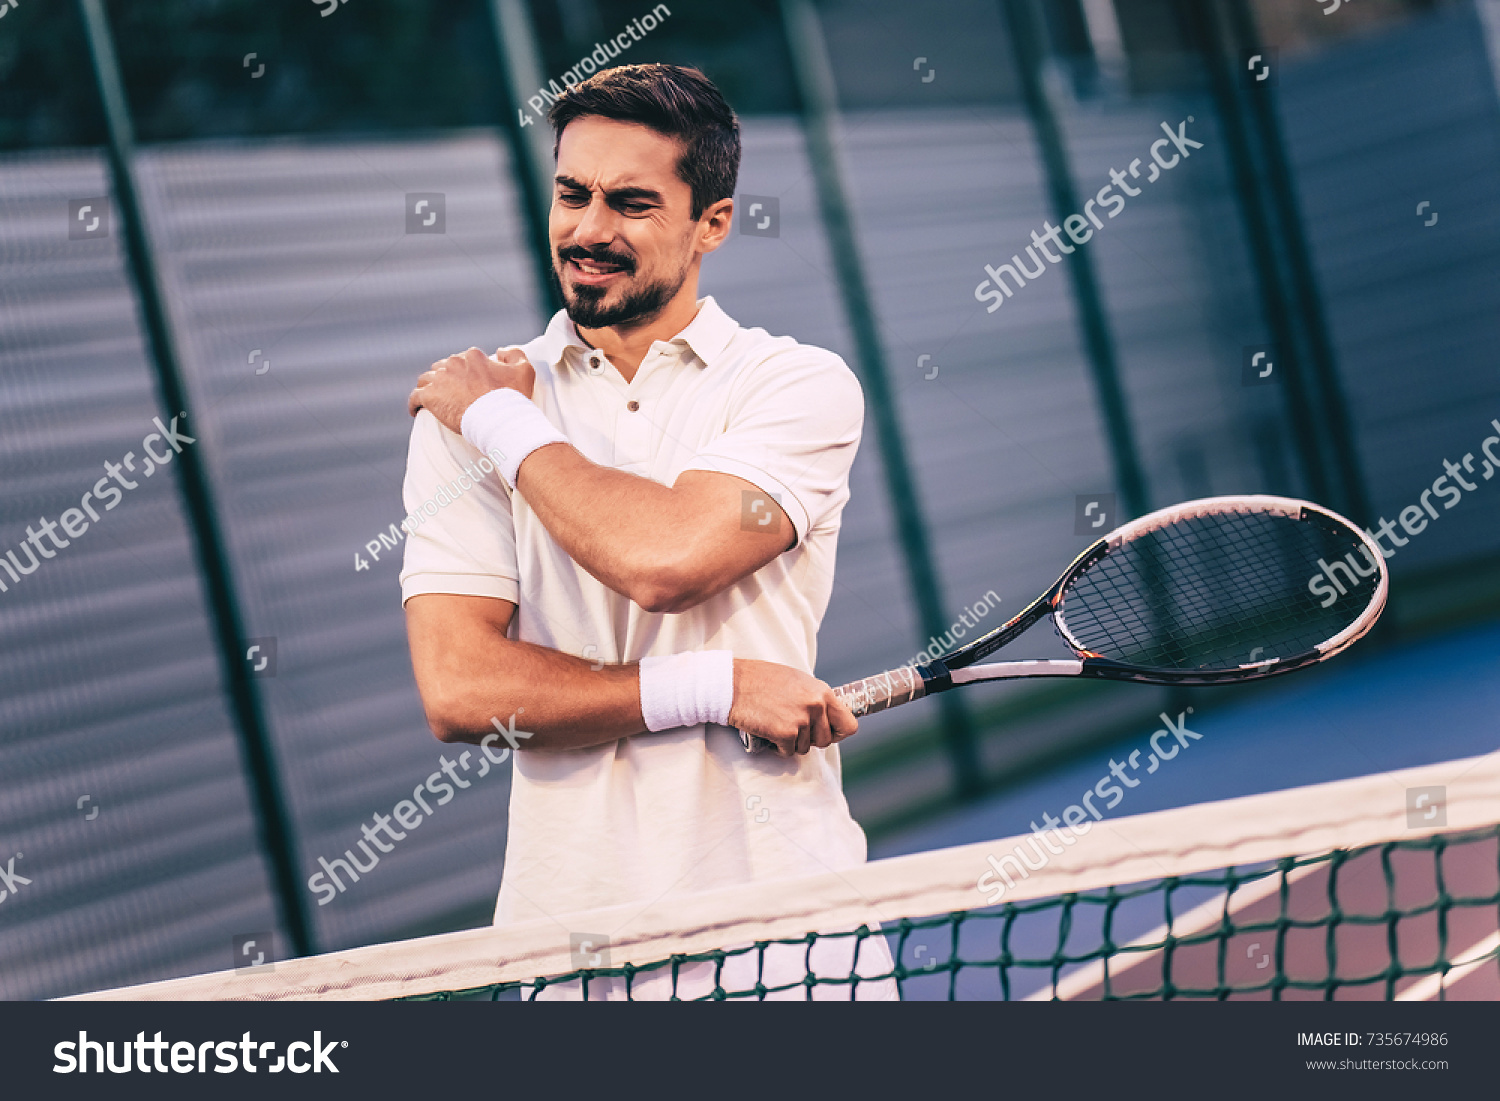 Handsome man on tennis court. Young tennis player. Shoulder pain #735674986